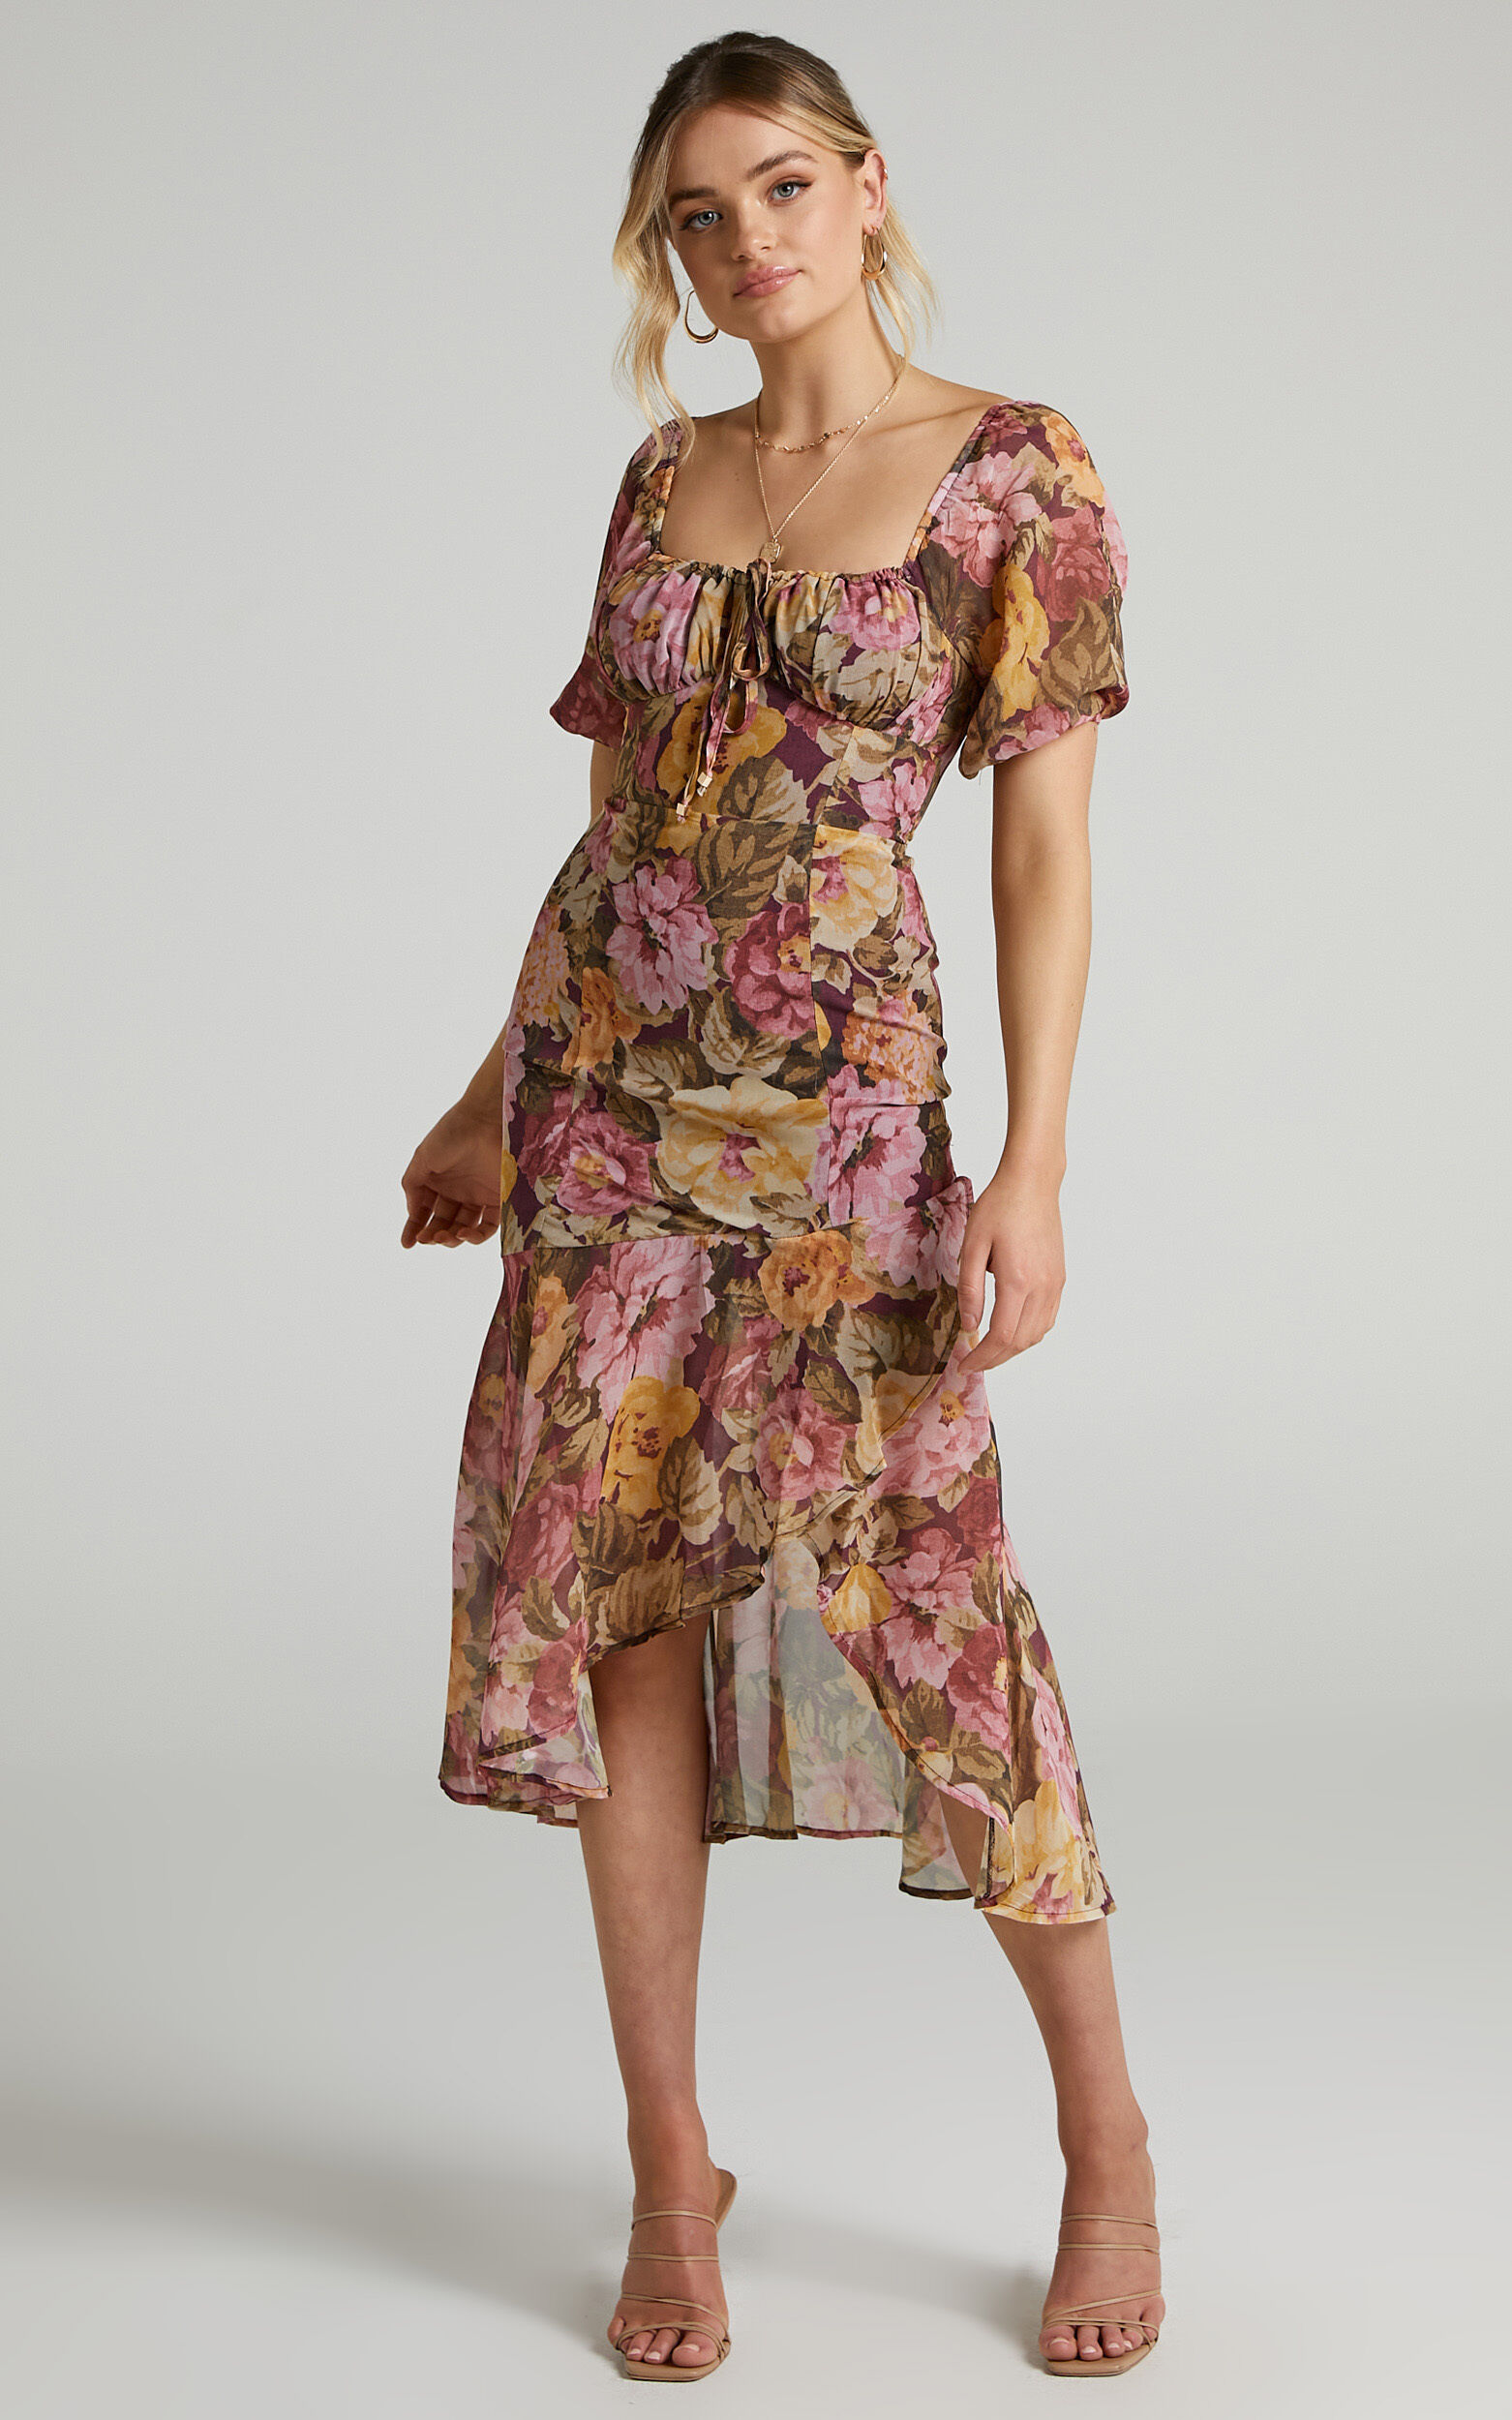 Jasalina Puff Sleeve Midi Dress in Classic Floral - 06, PNK1, super-hi-res image number null